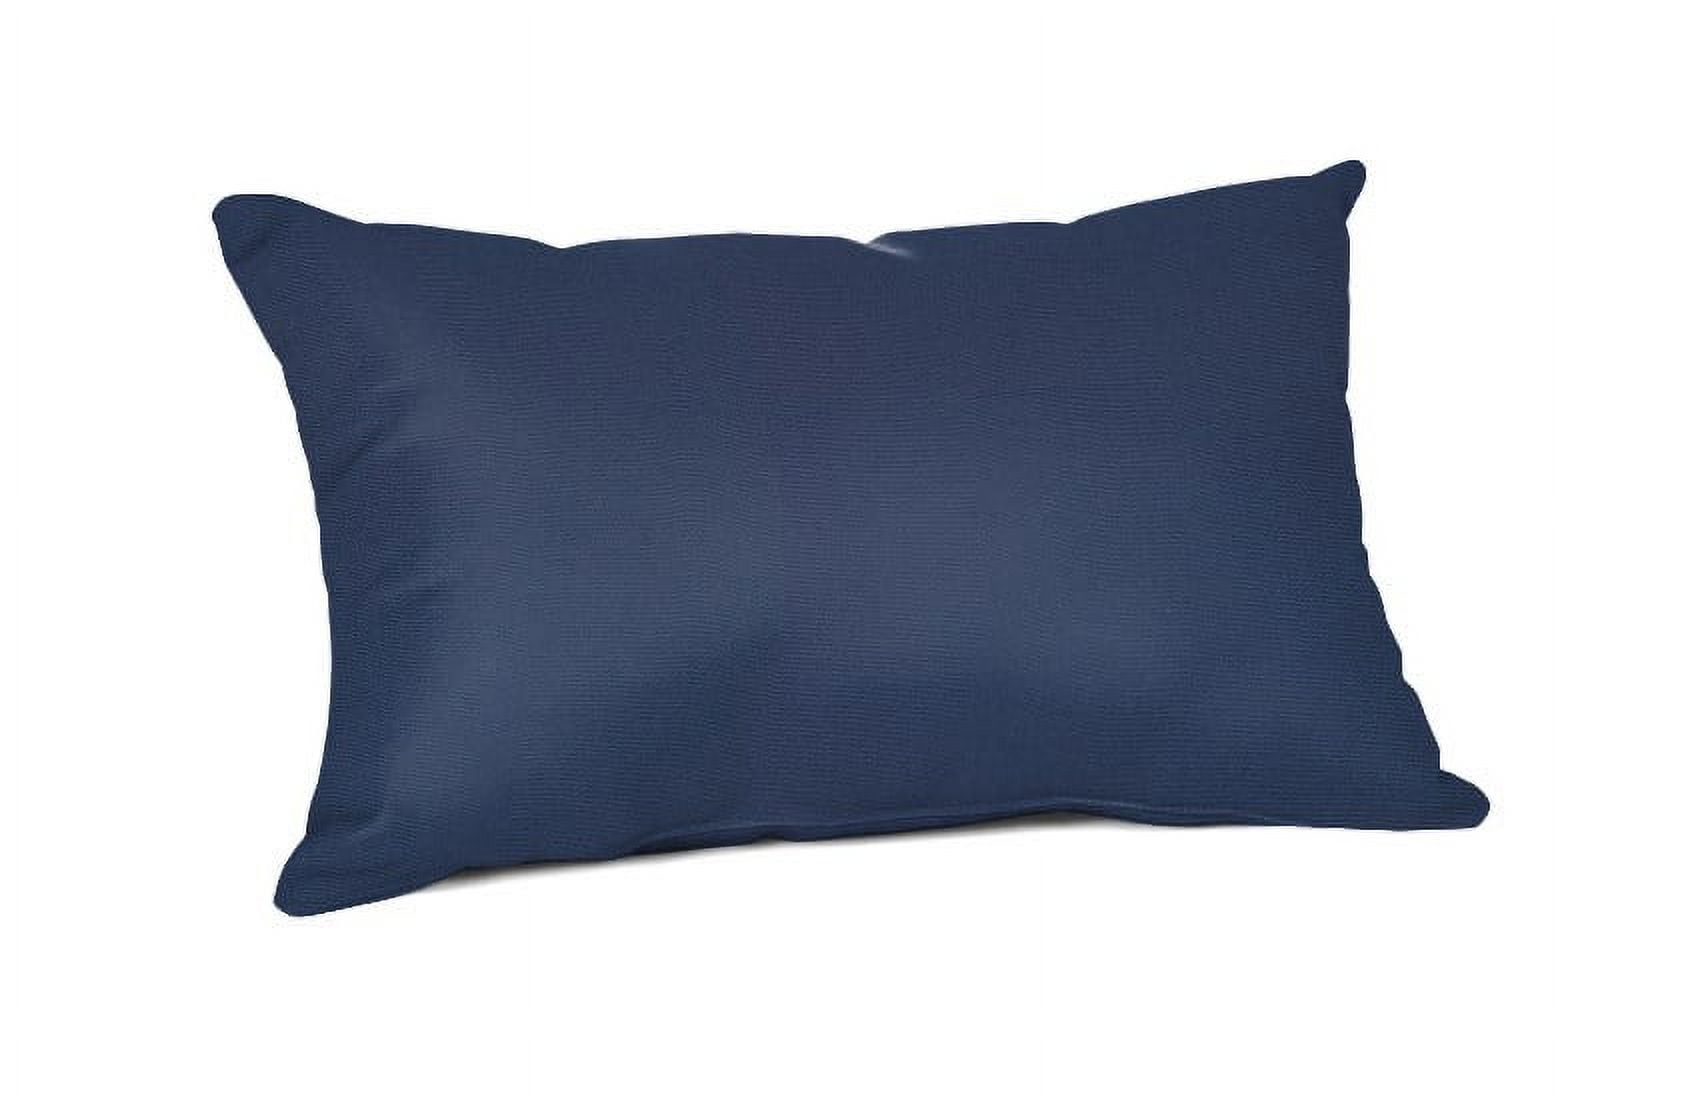 8×8 inches Pillow – FREE Shipping – E.R.S. Co.